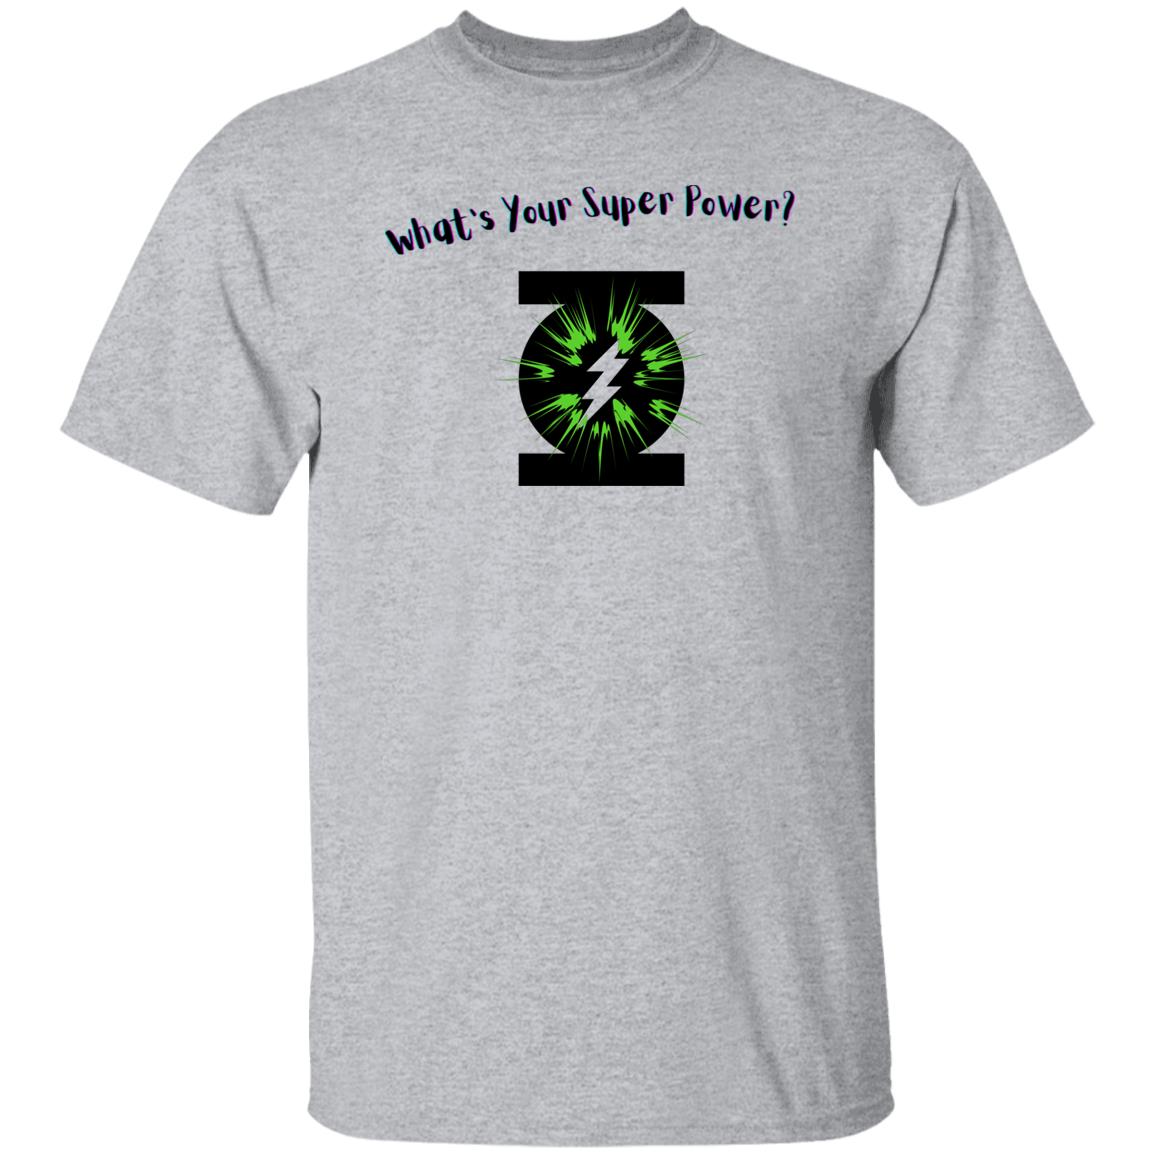 What's Your Power Cotton Super Tee